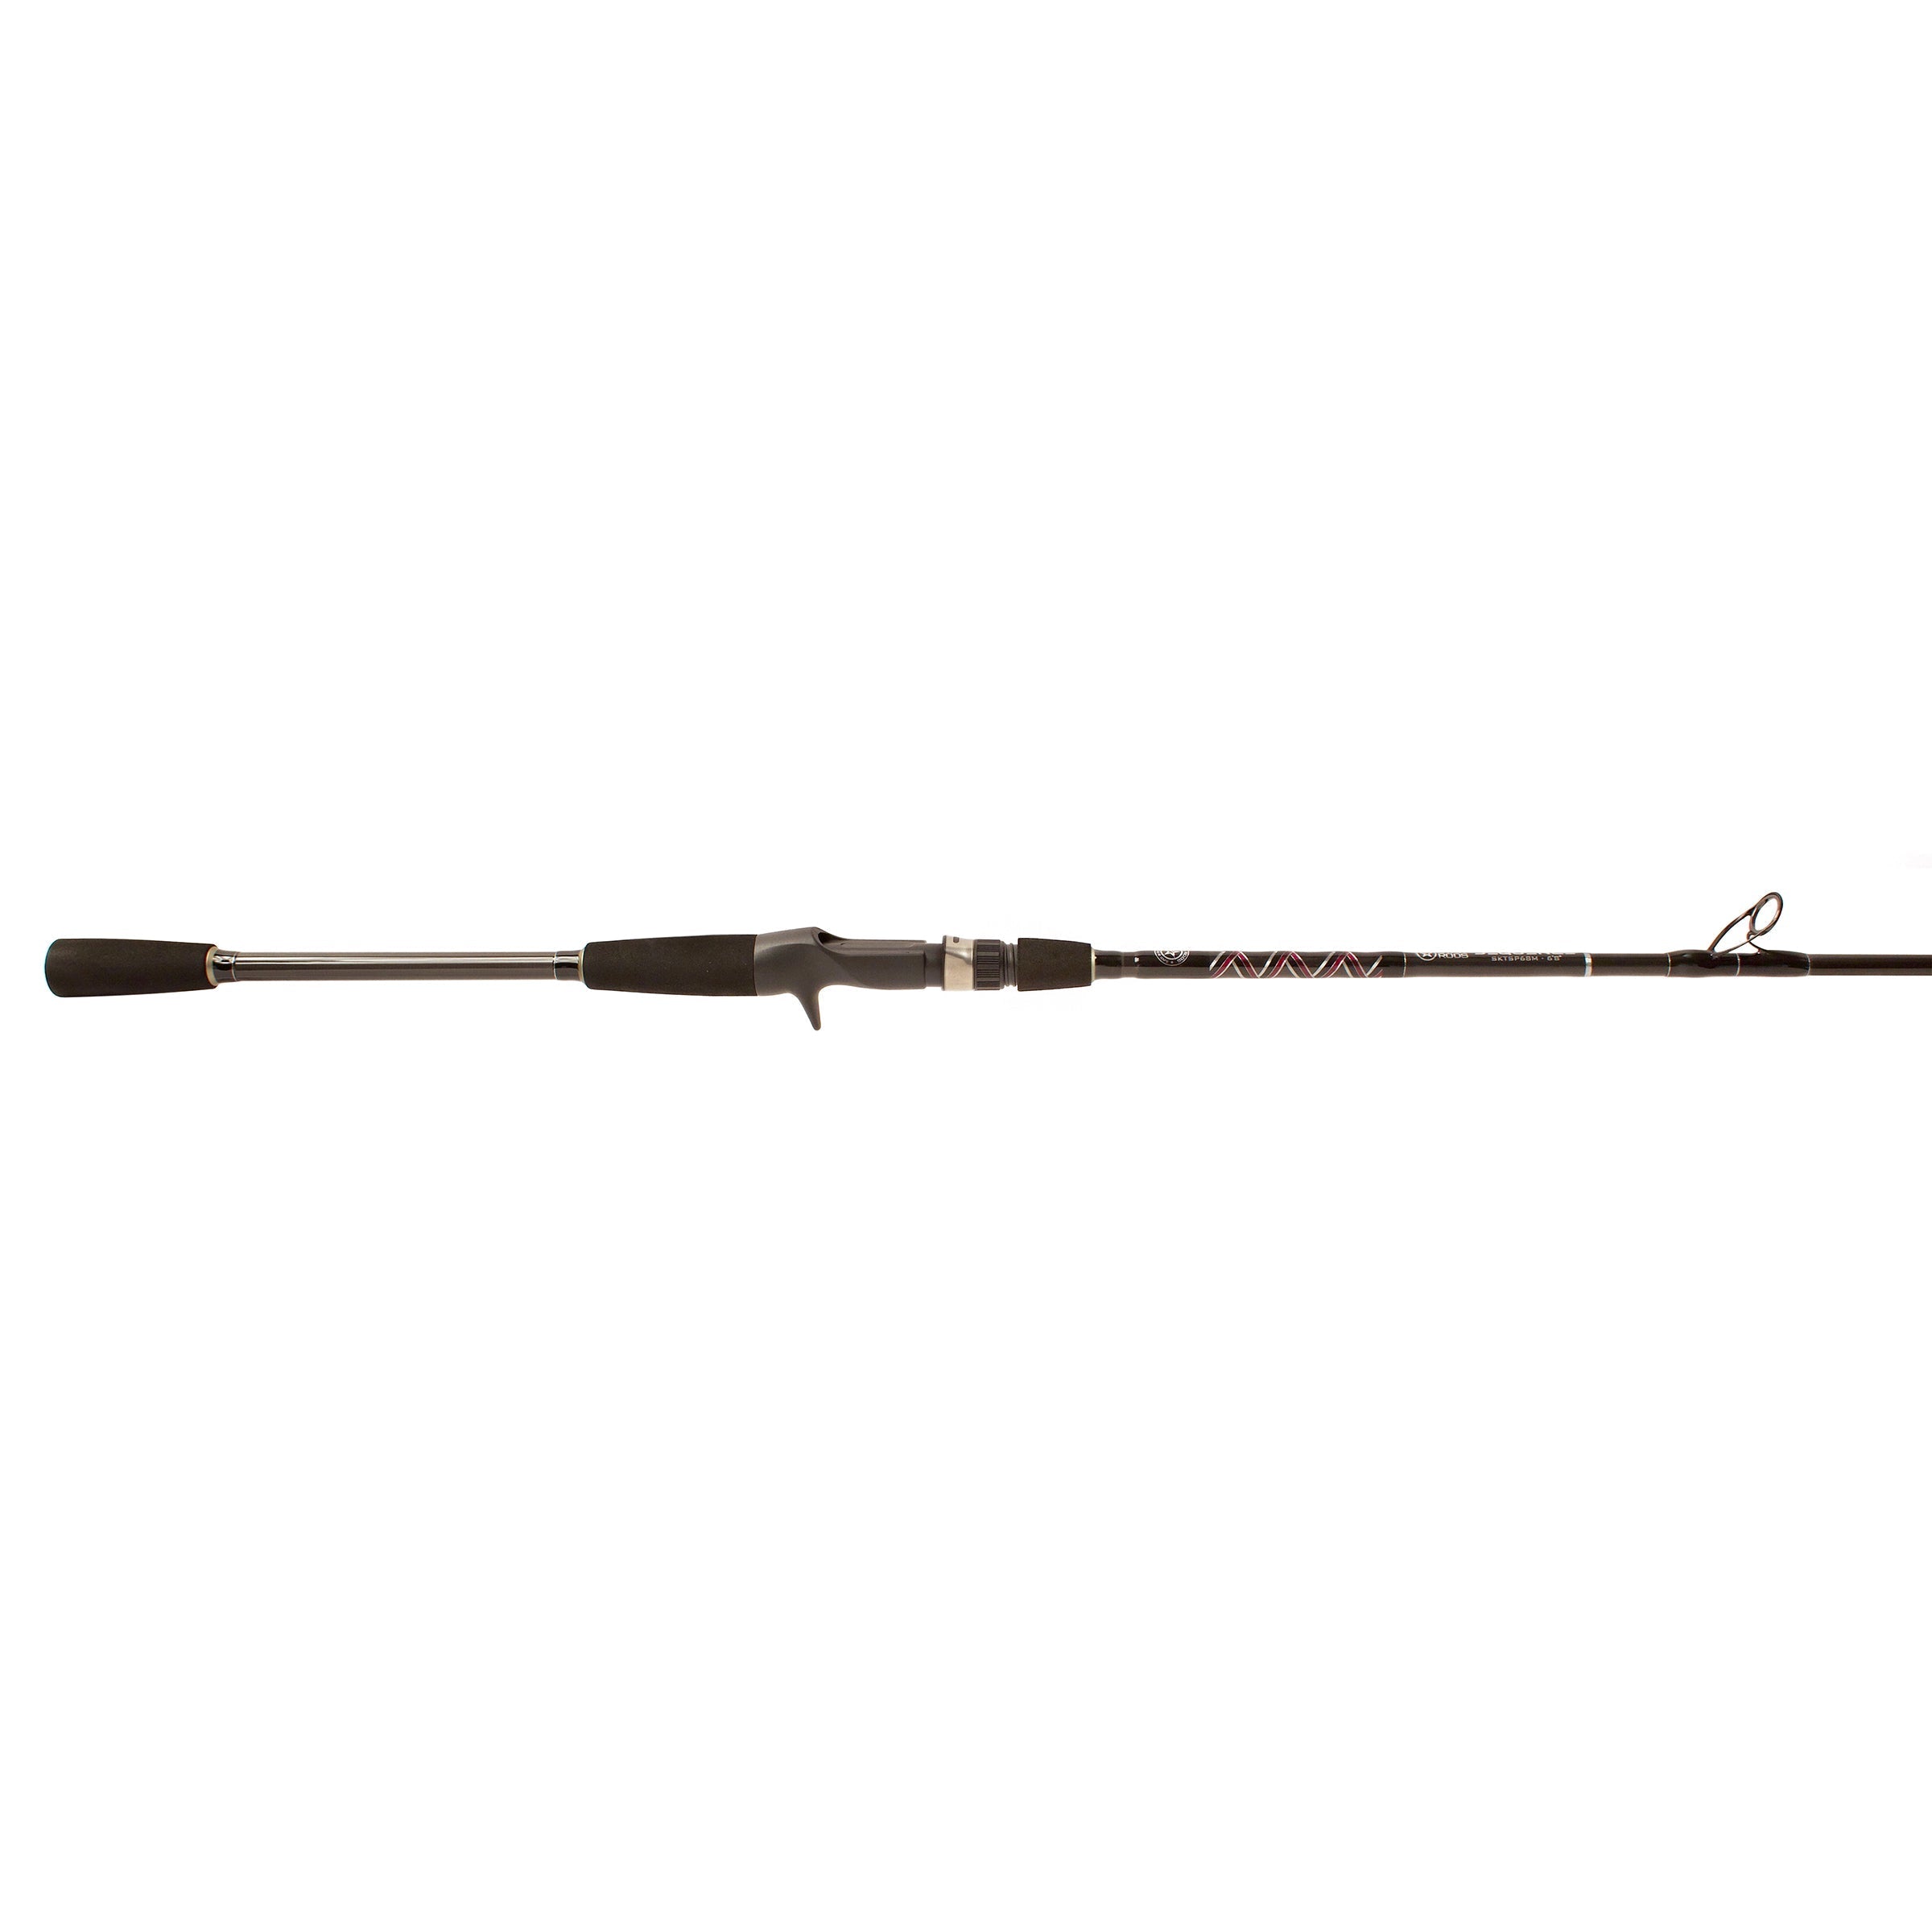 Sequence Slow Pitch Jigging Rods